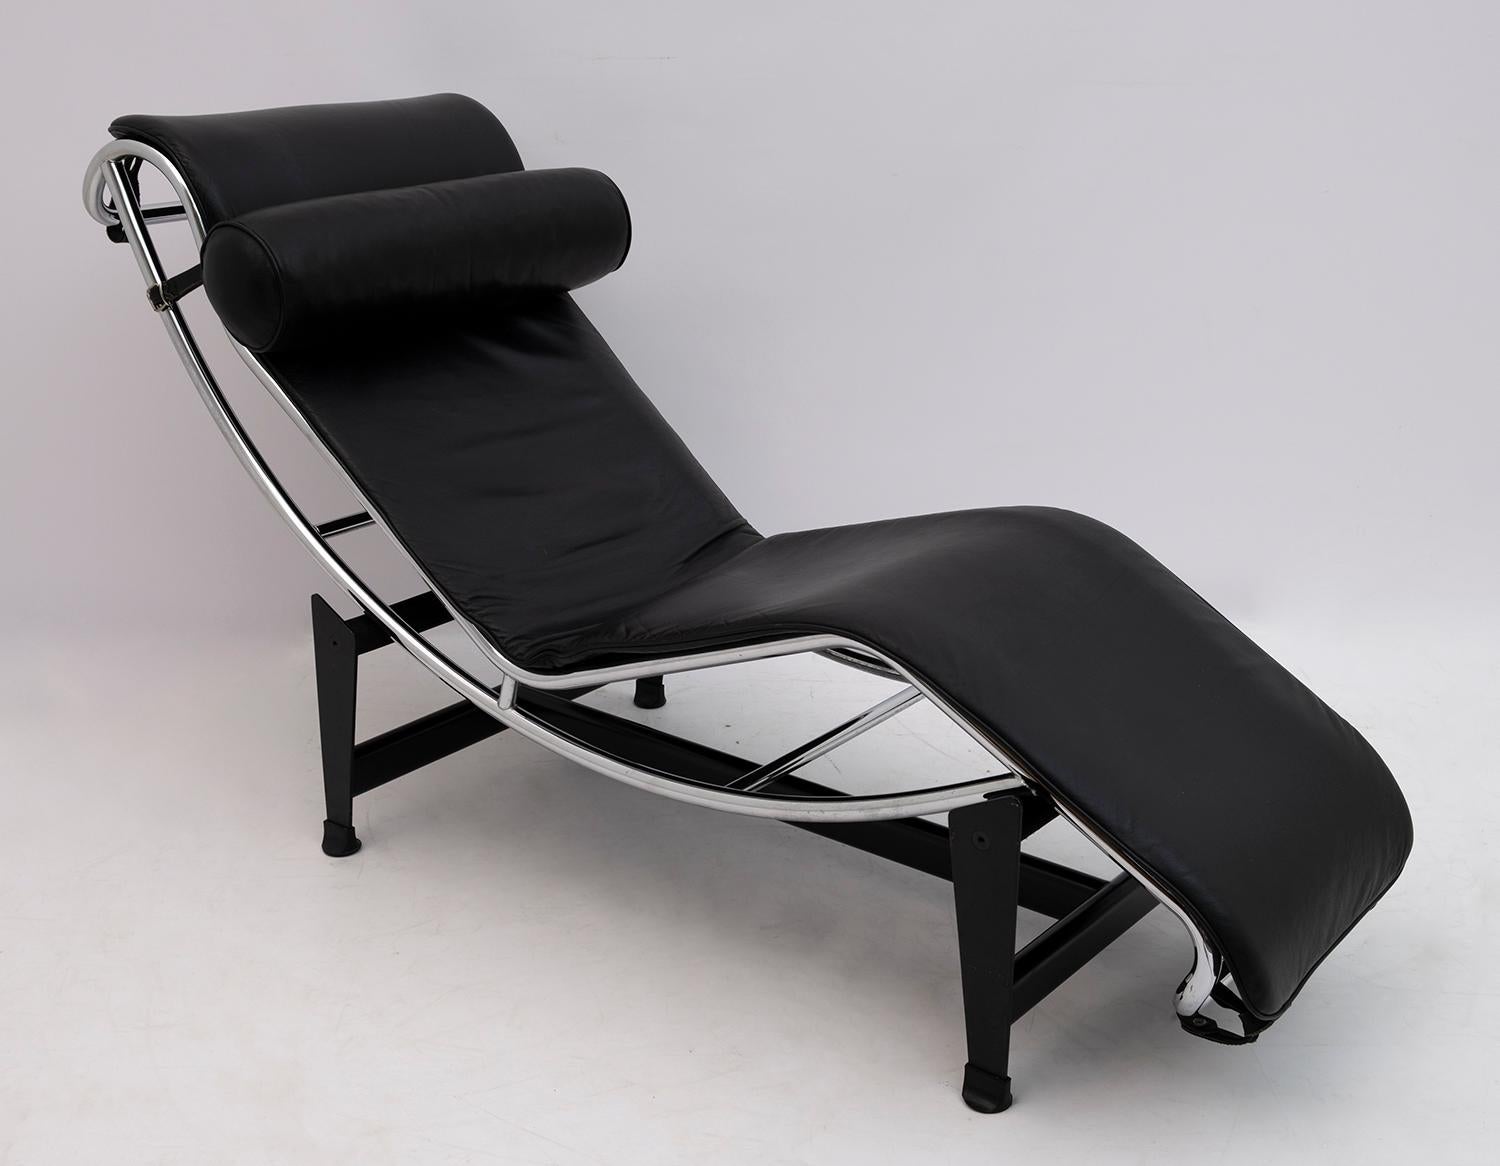 Variable inclination chaise longue with cradle in polished trivalent chromed steel (CR3). Black painted steel pedestal. Made in the Le Corbusier style.

Le Corbusier, Pierre Jeanneret, Charlotte Perriand
Designed in 1928 and made famous by